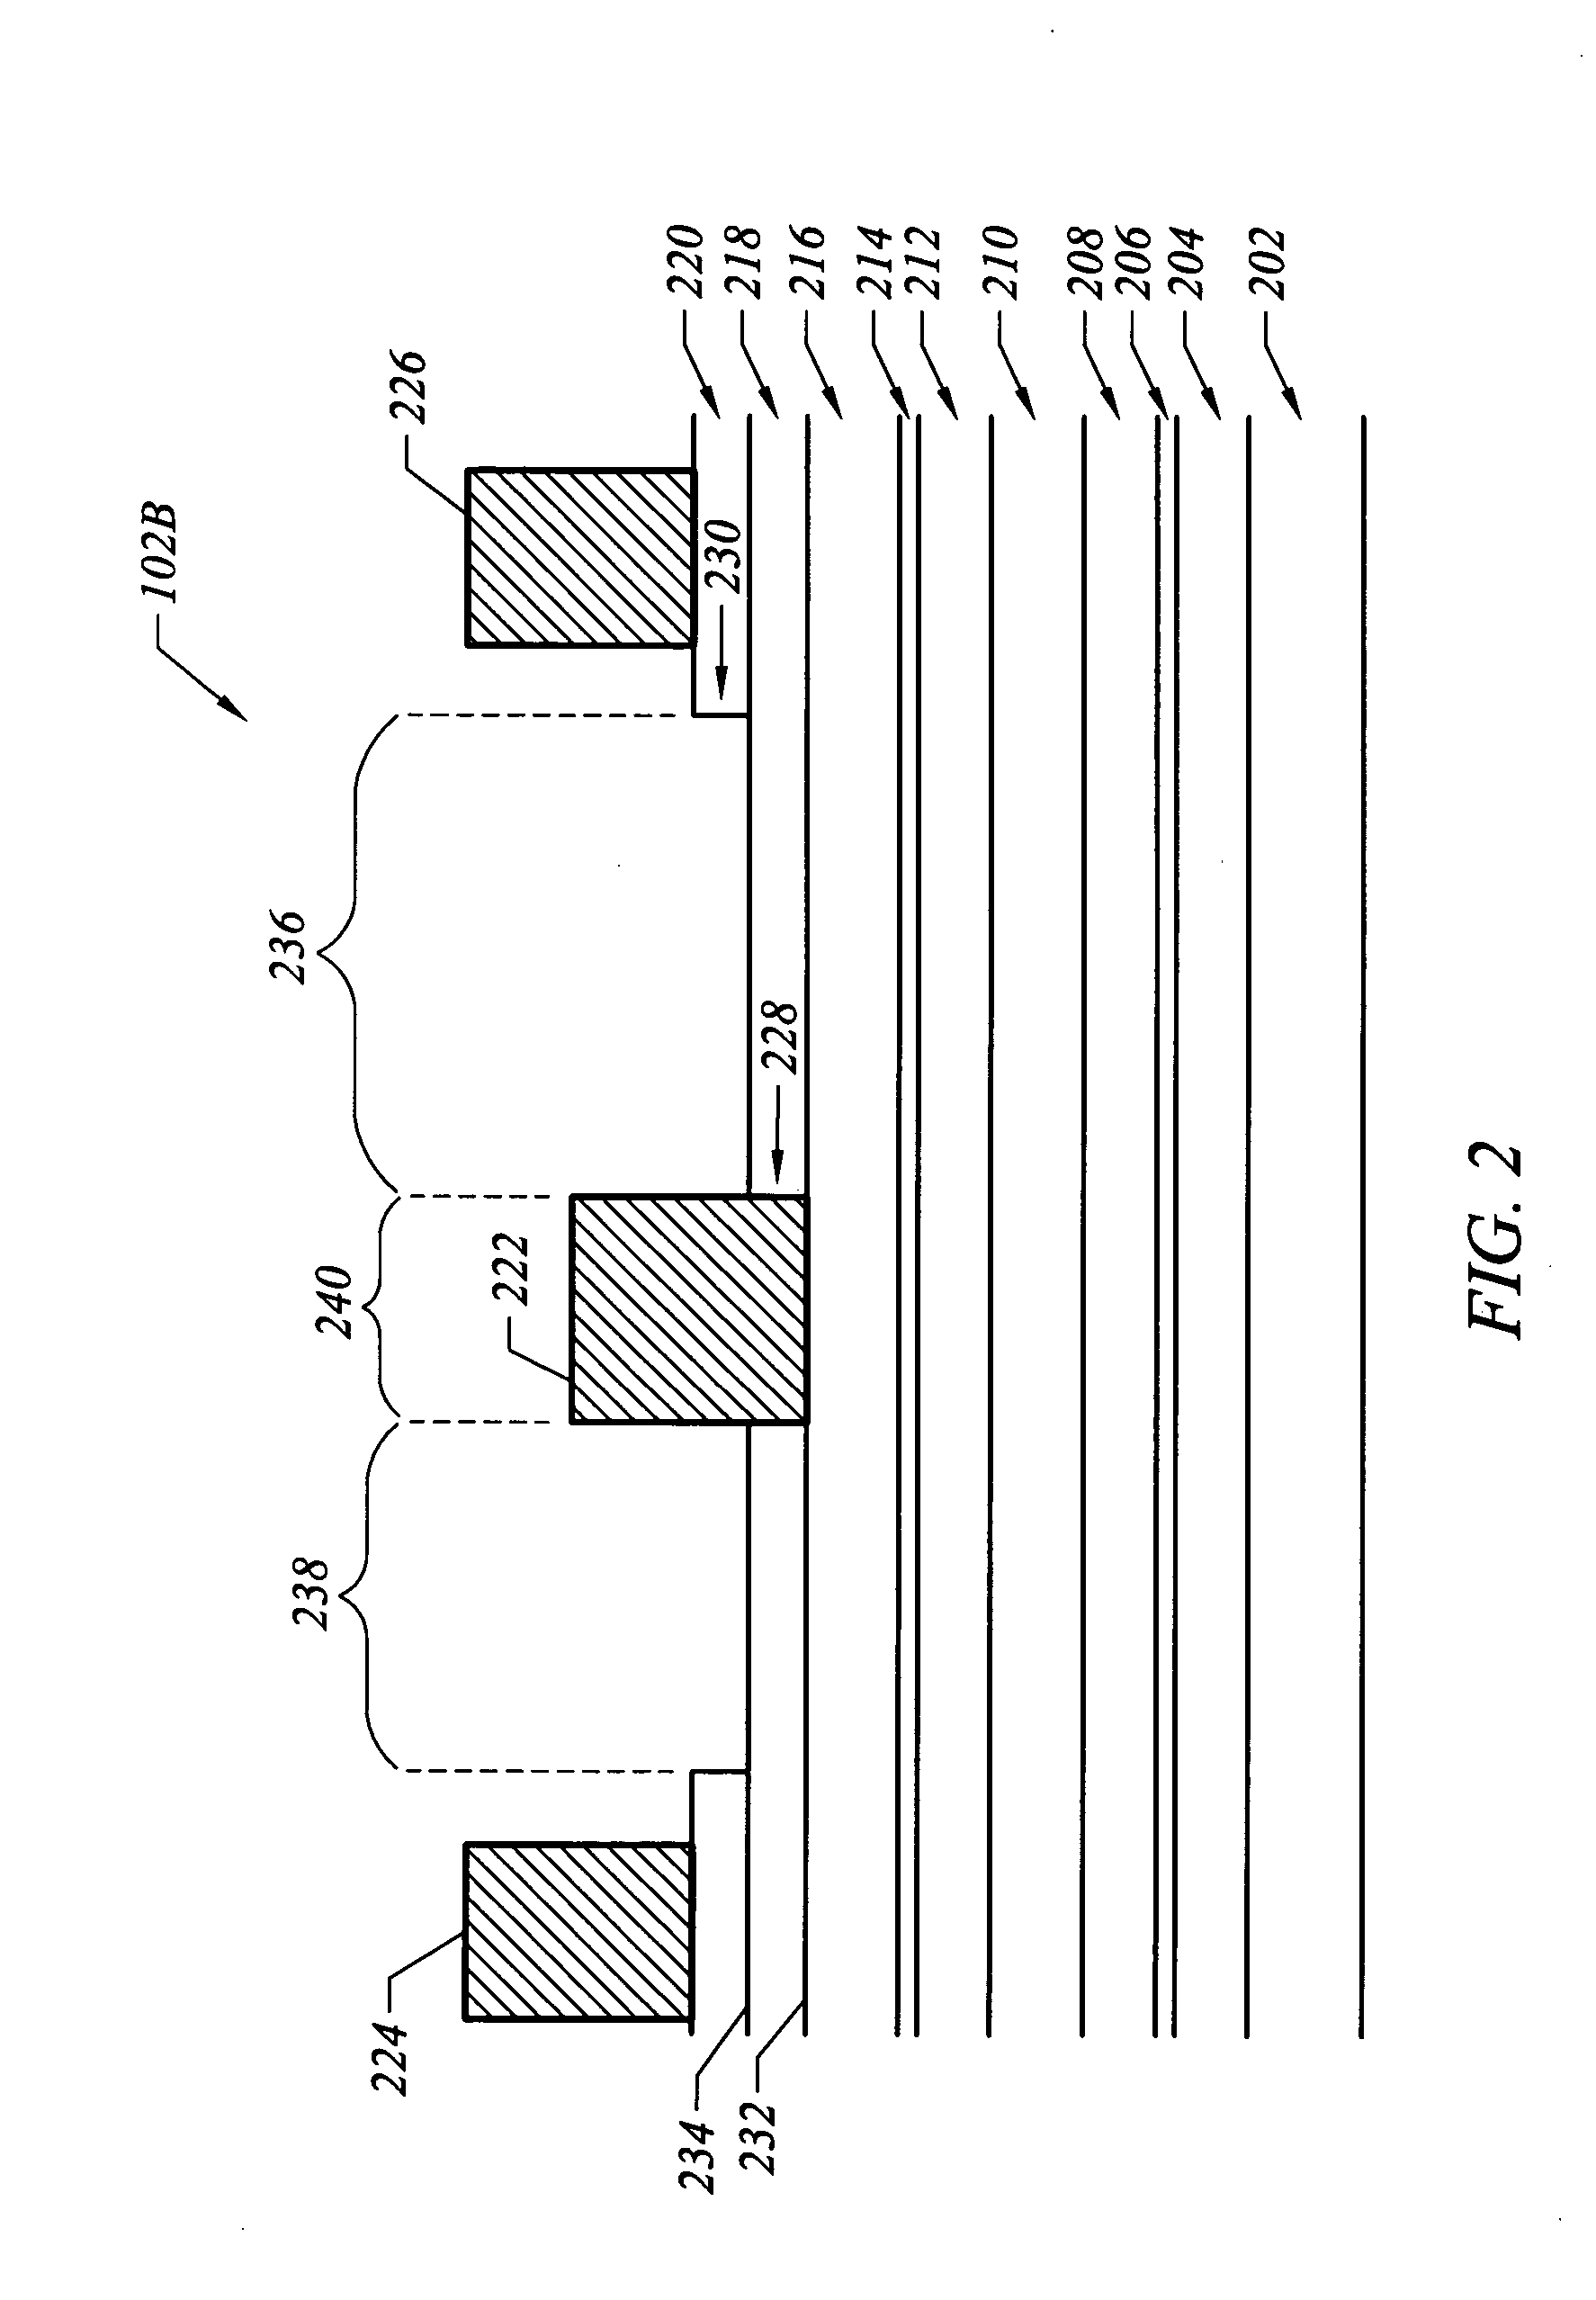 Integrated circuit with enhancement mode pseudomorphic high electron mobility transistors having on-chip electrostatic discharge protection